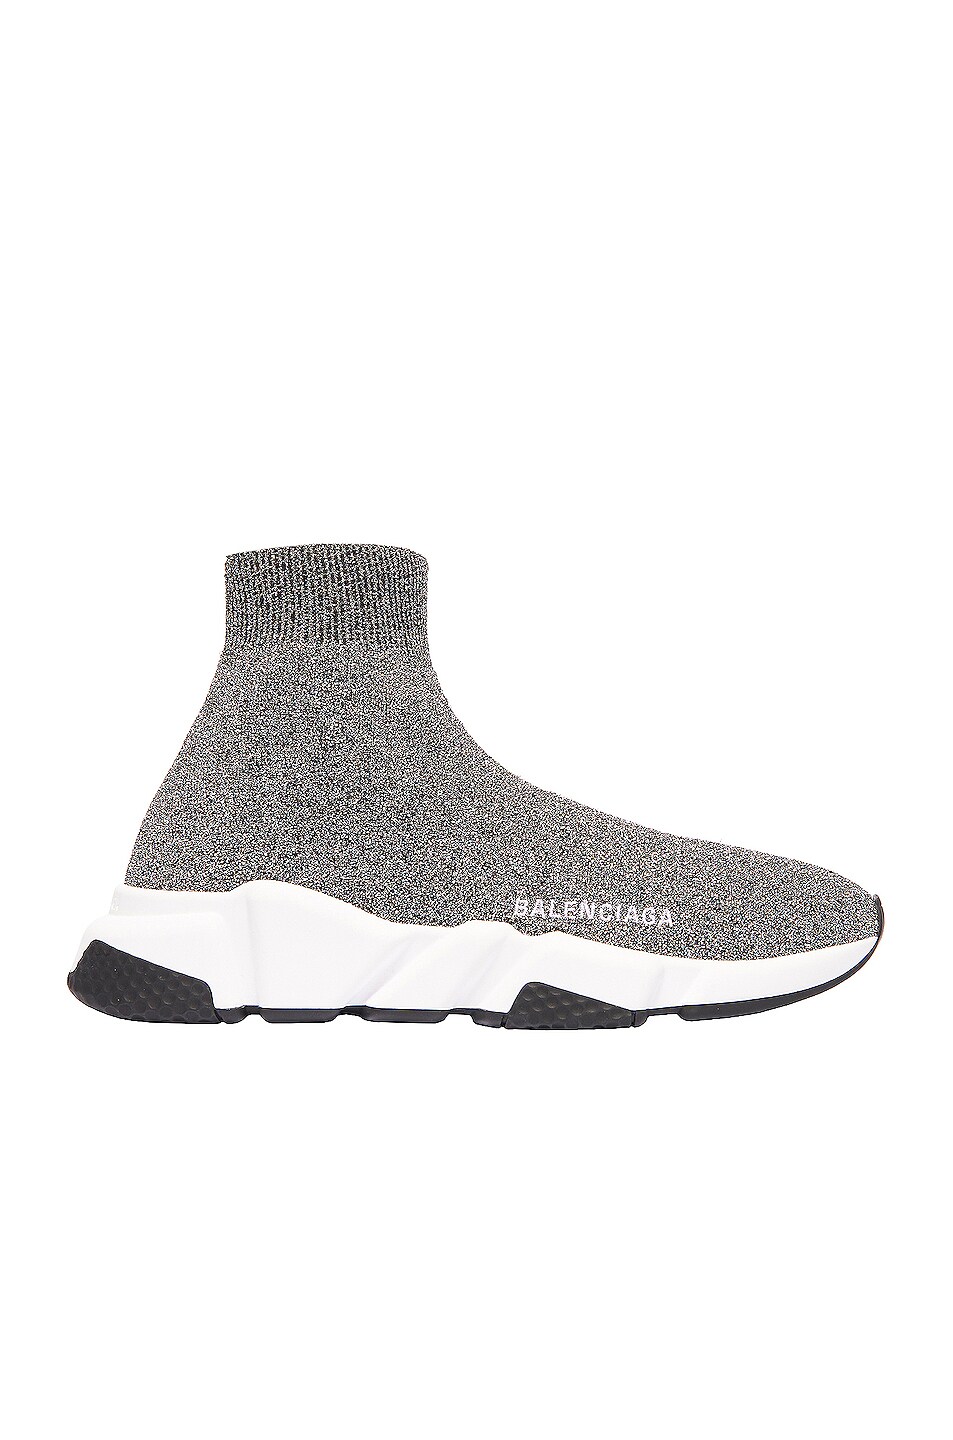 Image 1 of Balenciaga Speed Knit Sneakers in Black & White